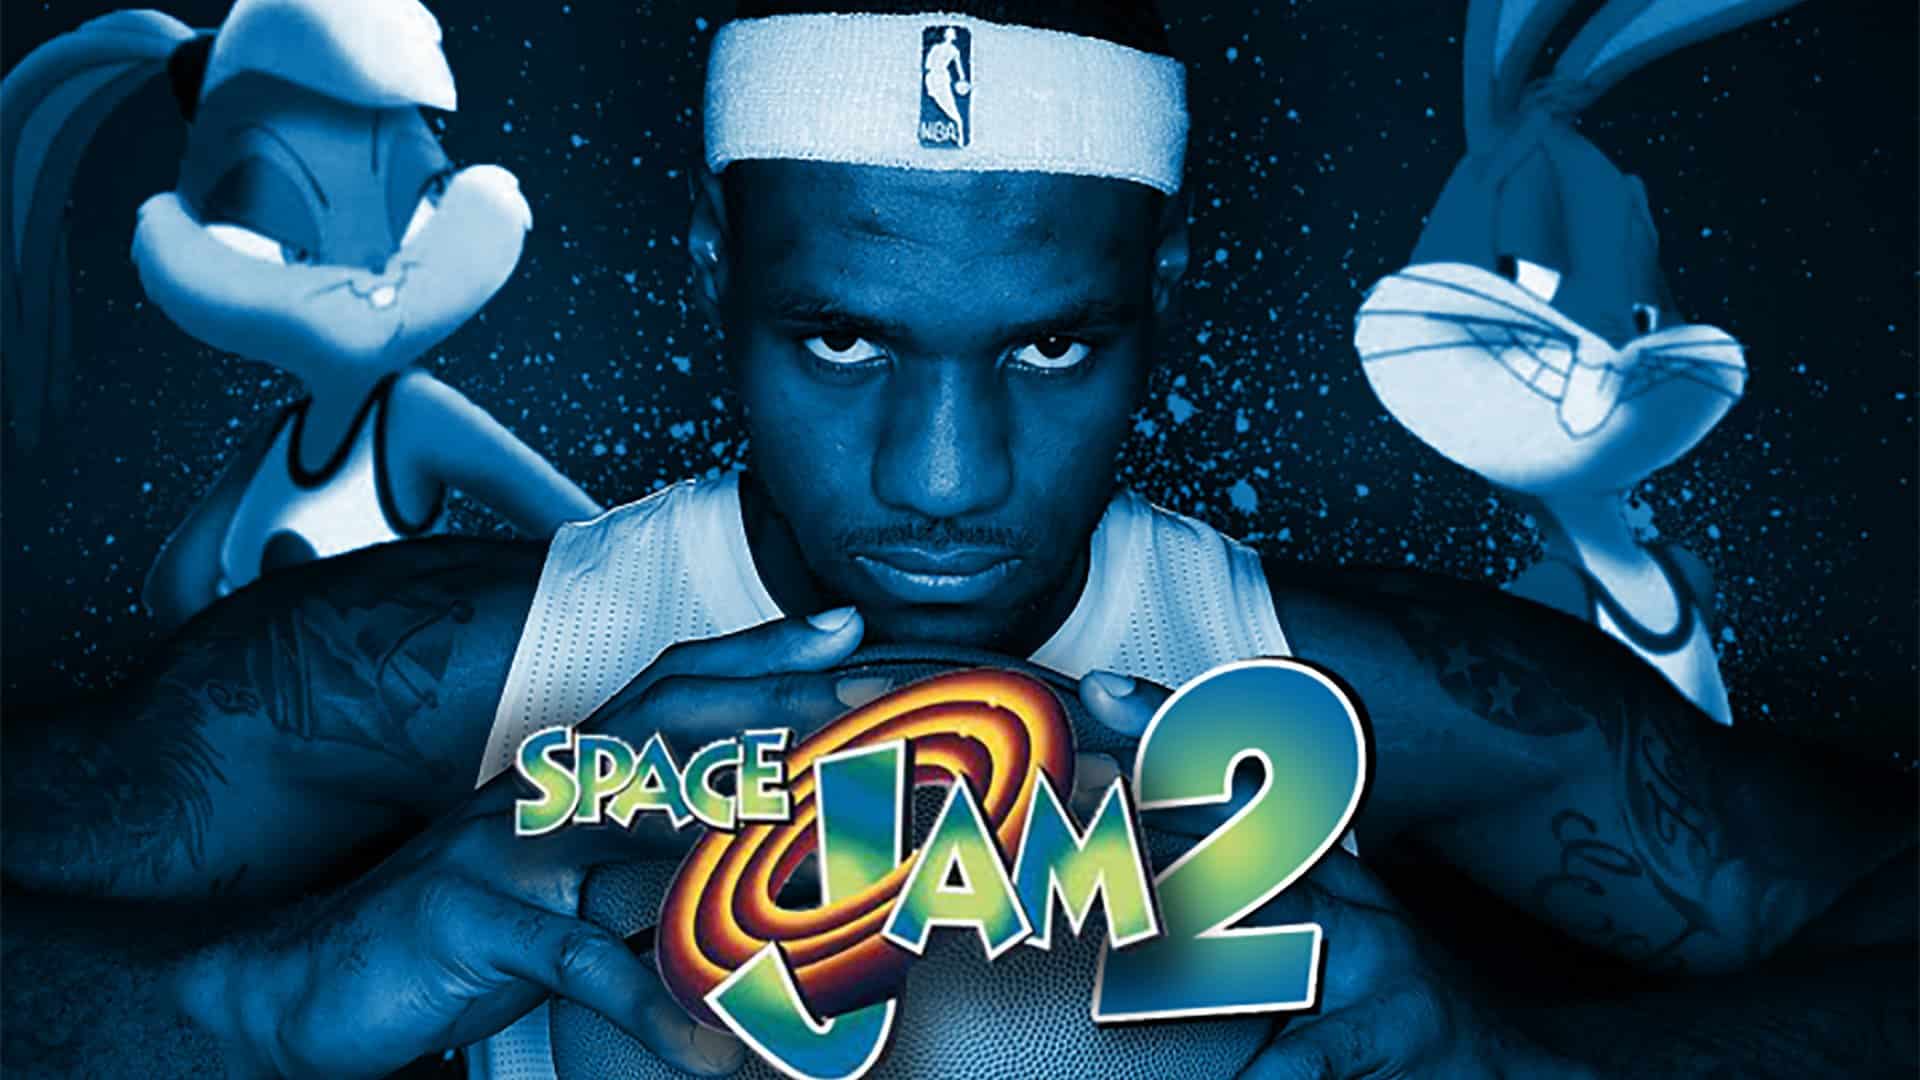 Like MJ, LeBron James Will Take on The Monstars In 'Space Jam 2